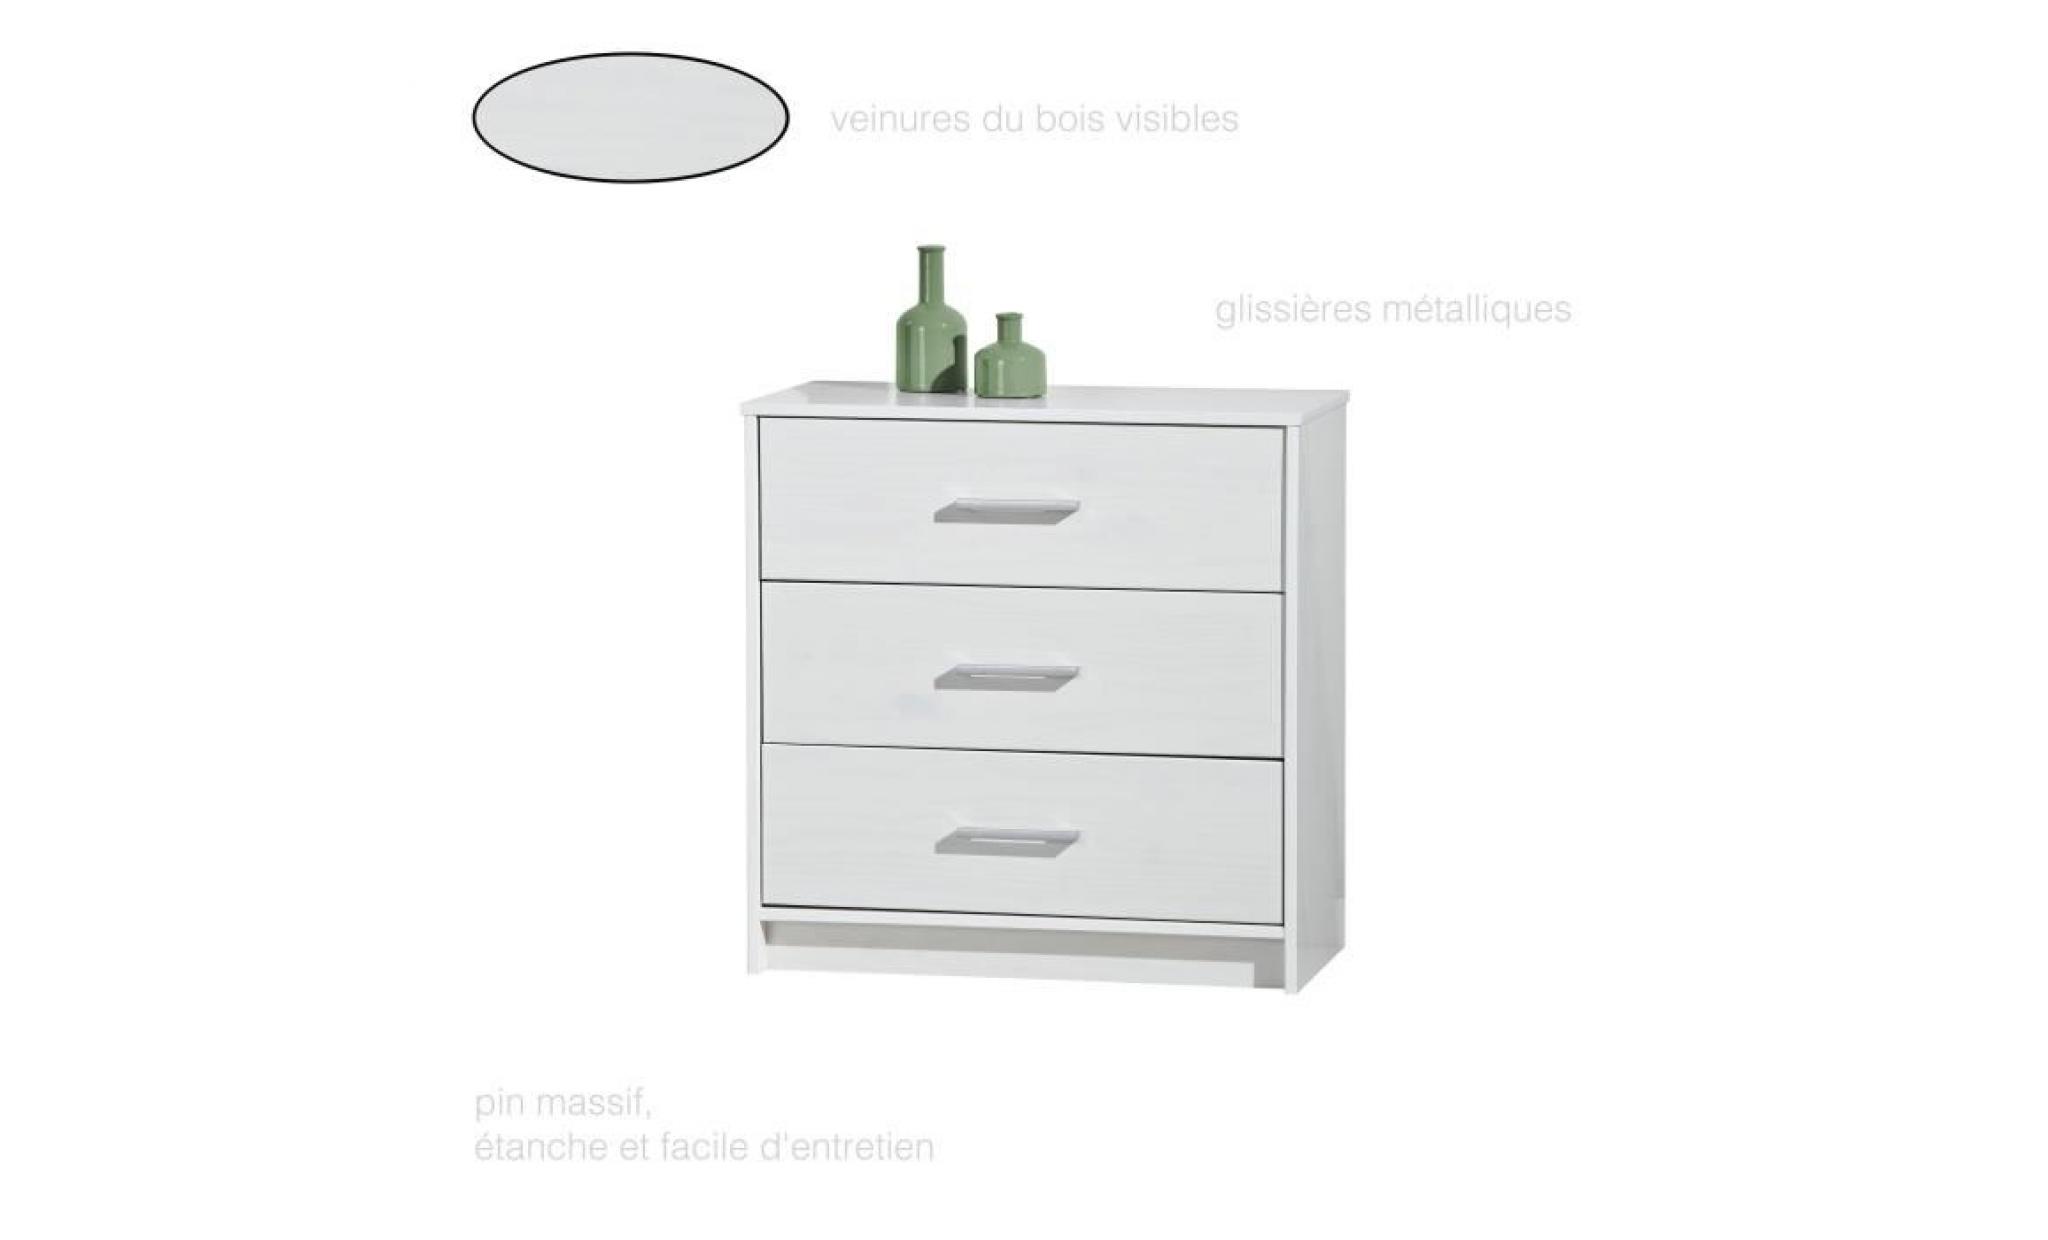 commode moderne 3 tiroirs, commode en pin massif, commode chambre blanche, commode rangement, commode chambre adulte, commode large